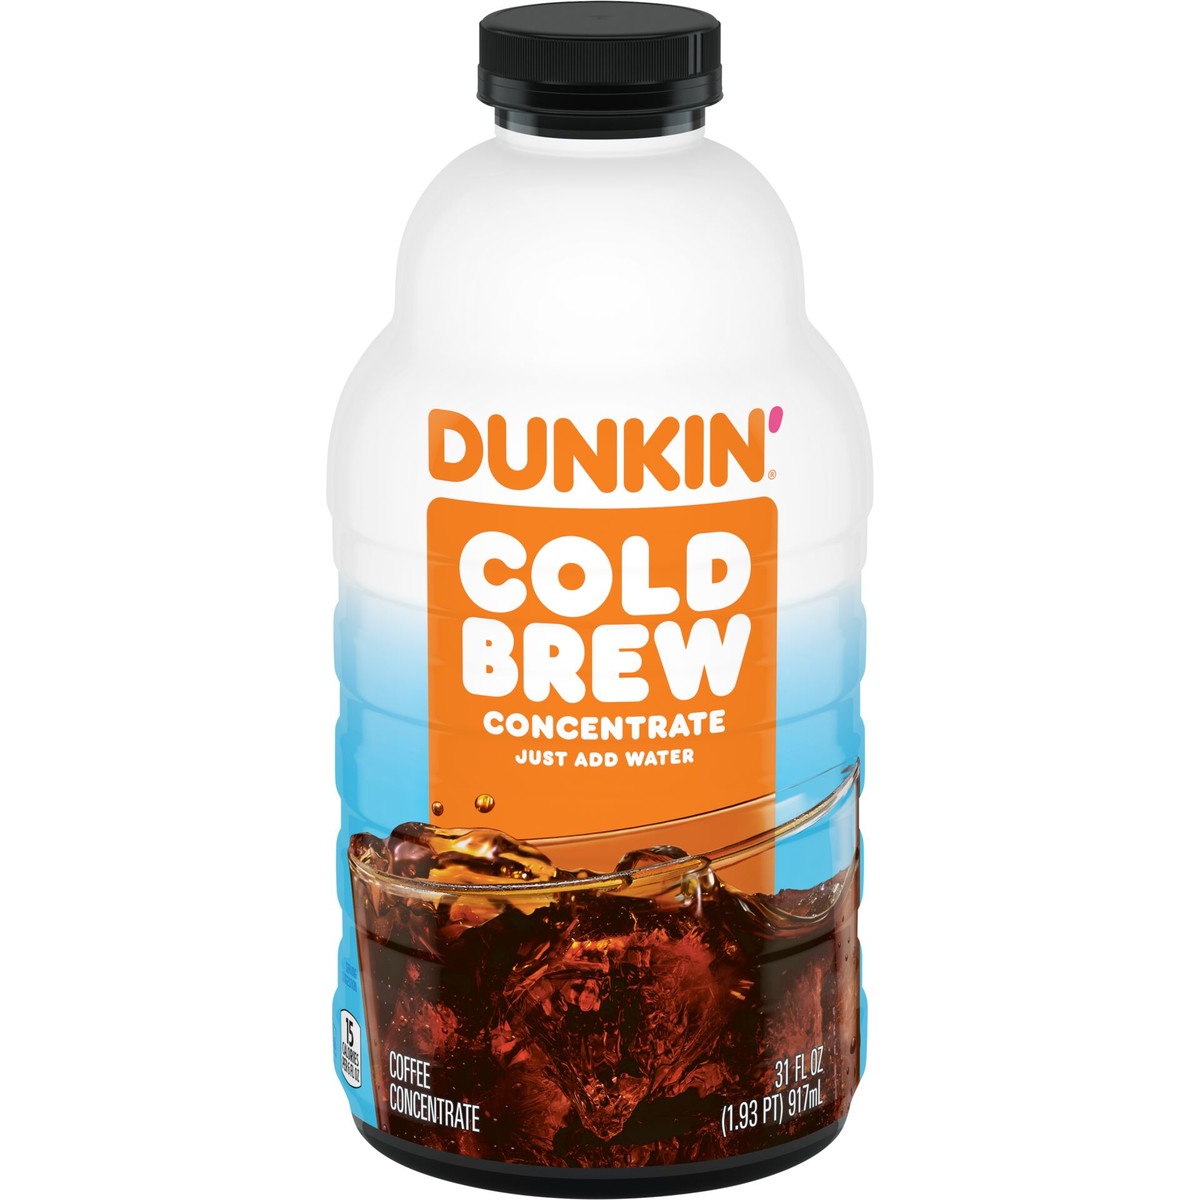 Dunkin’ Cold Brew Concentrate